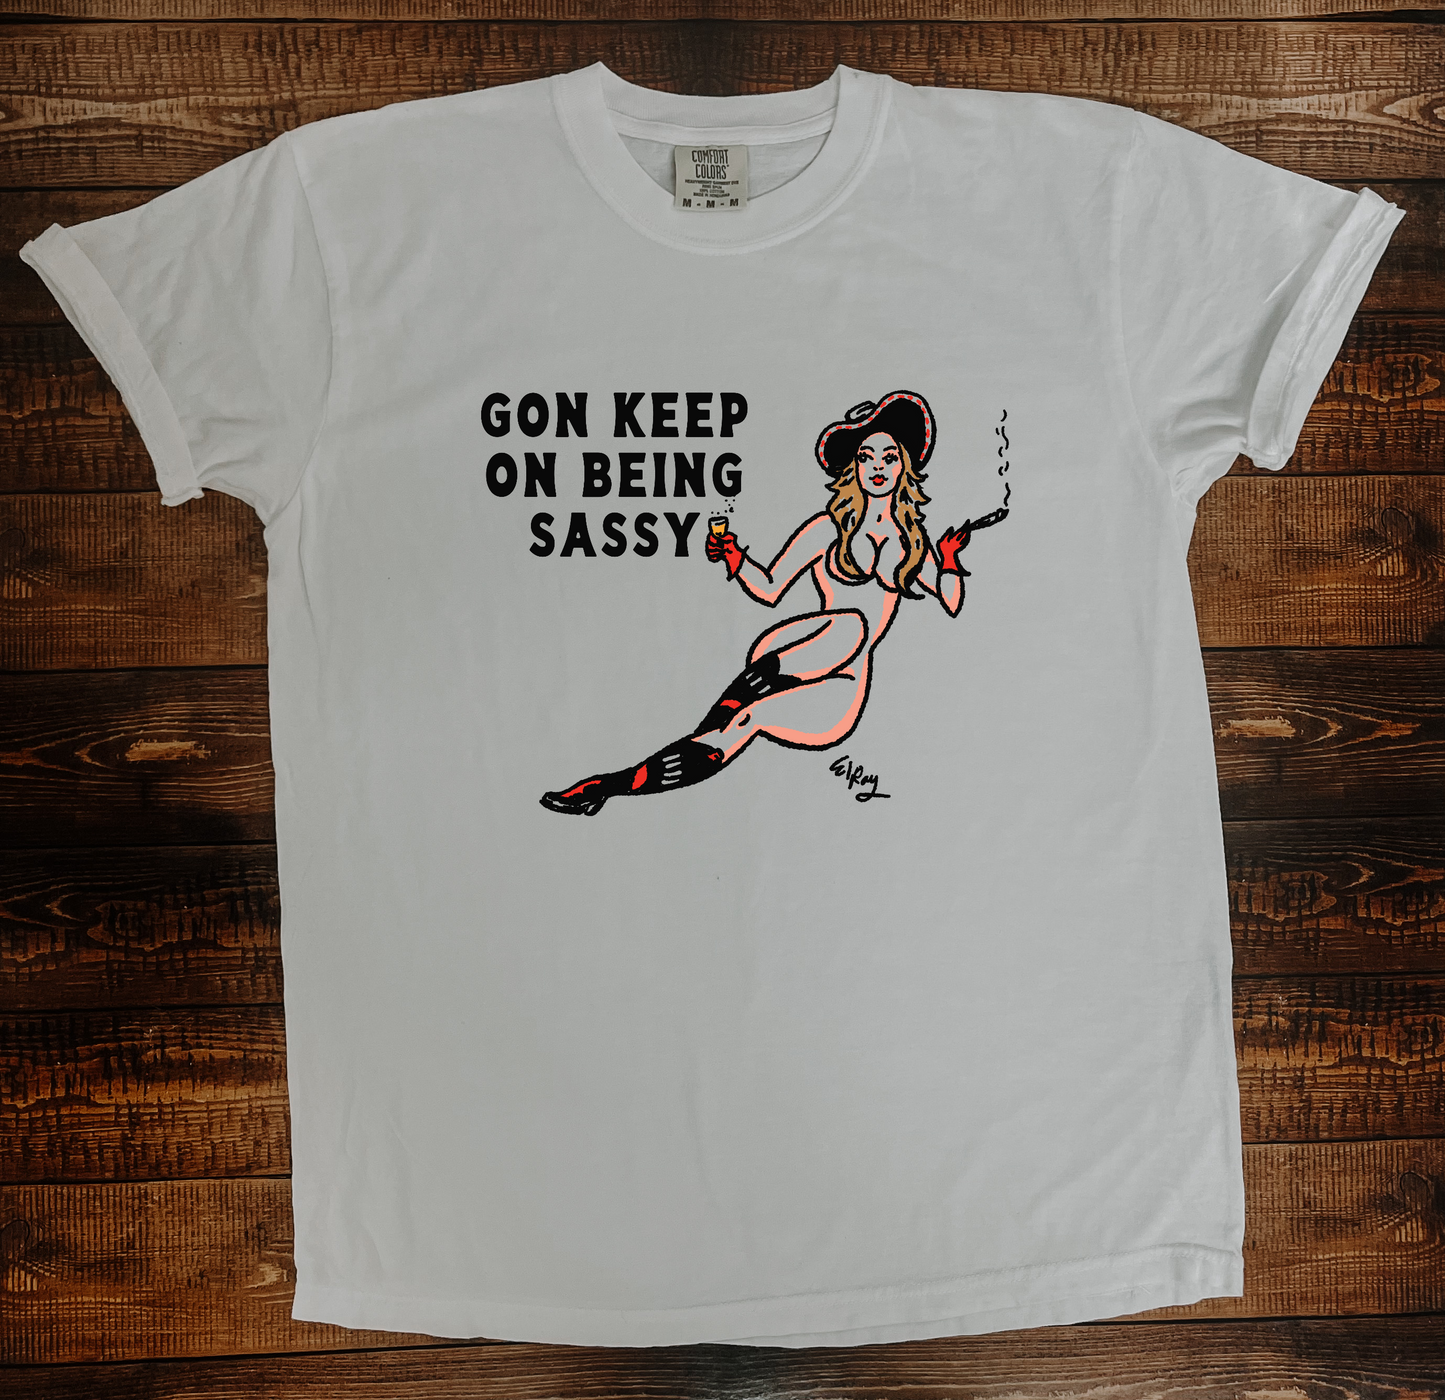 Gon keep on being sassy T Shirt